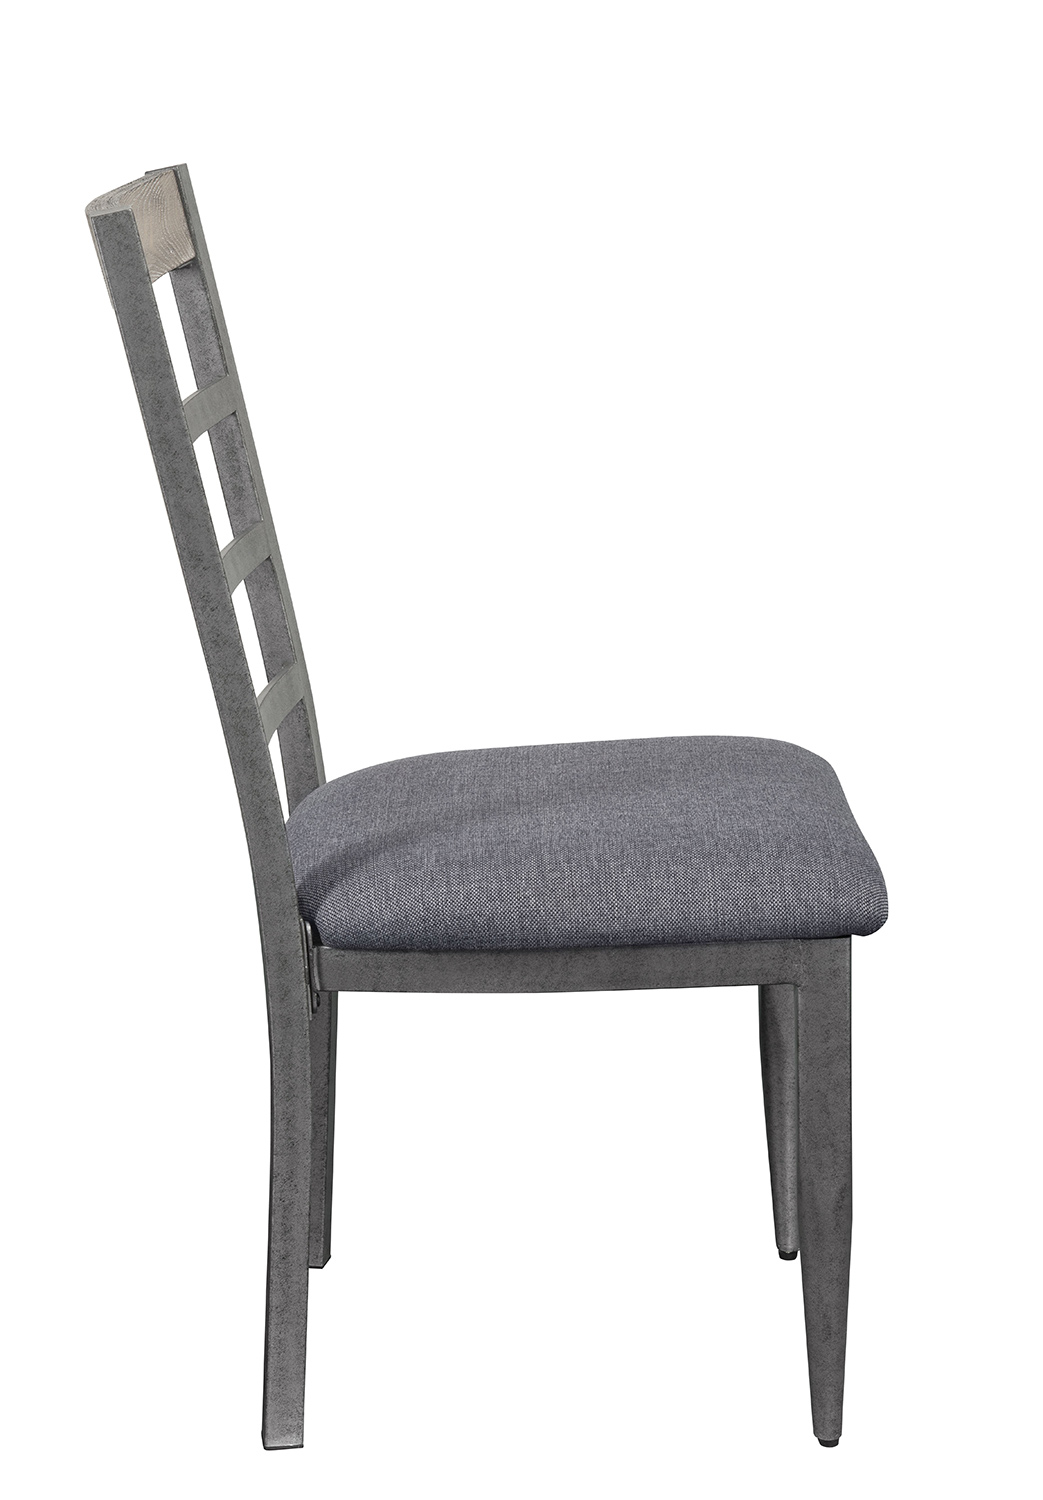 Acme Ornat Side Chair - Gray Fabric/Antique Gray